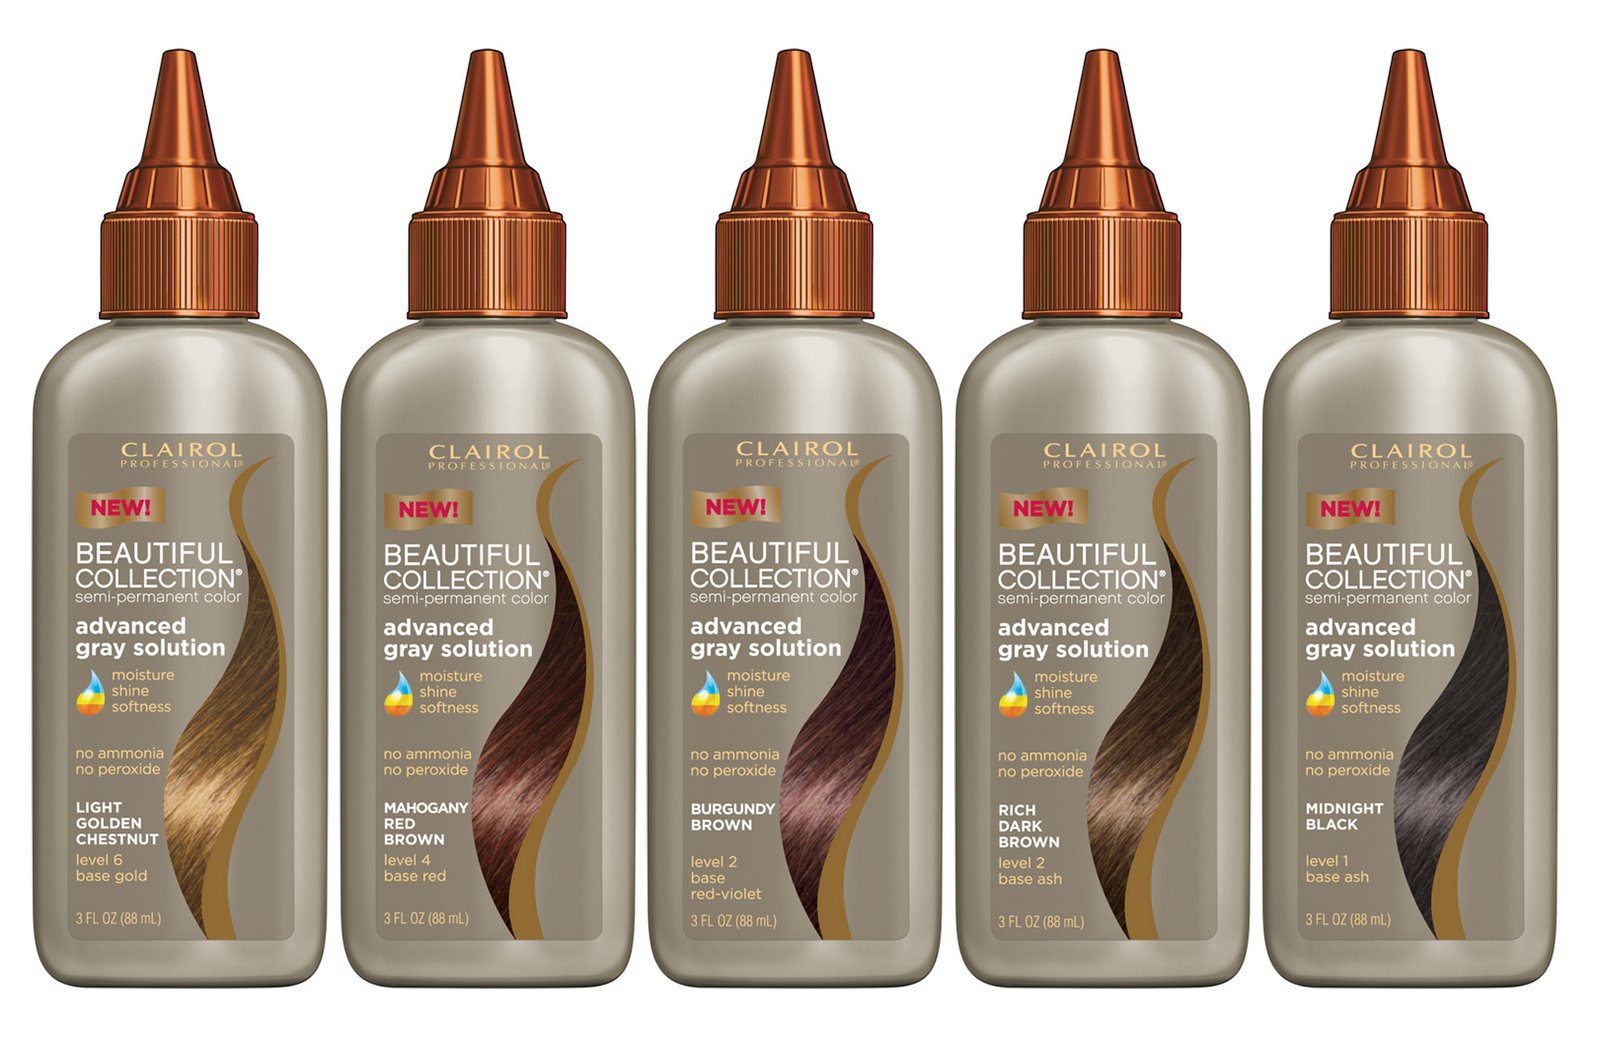 5. "Joico Intensity Semi-Permanent Hair Color in Peacock Green" - wide 6